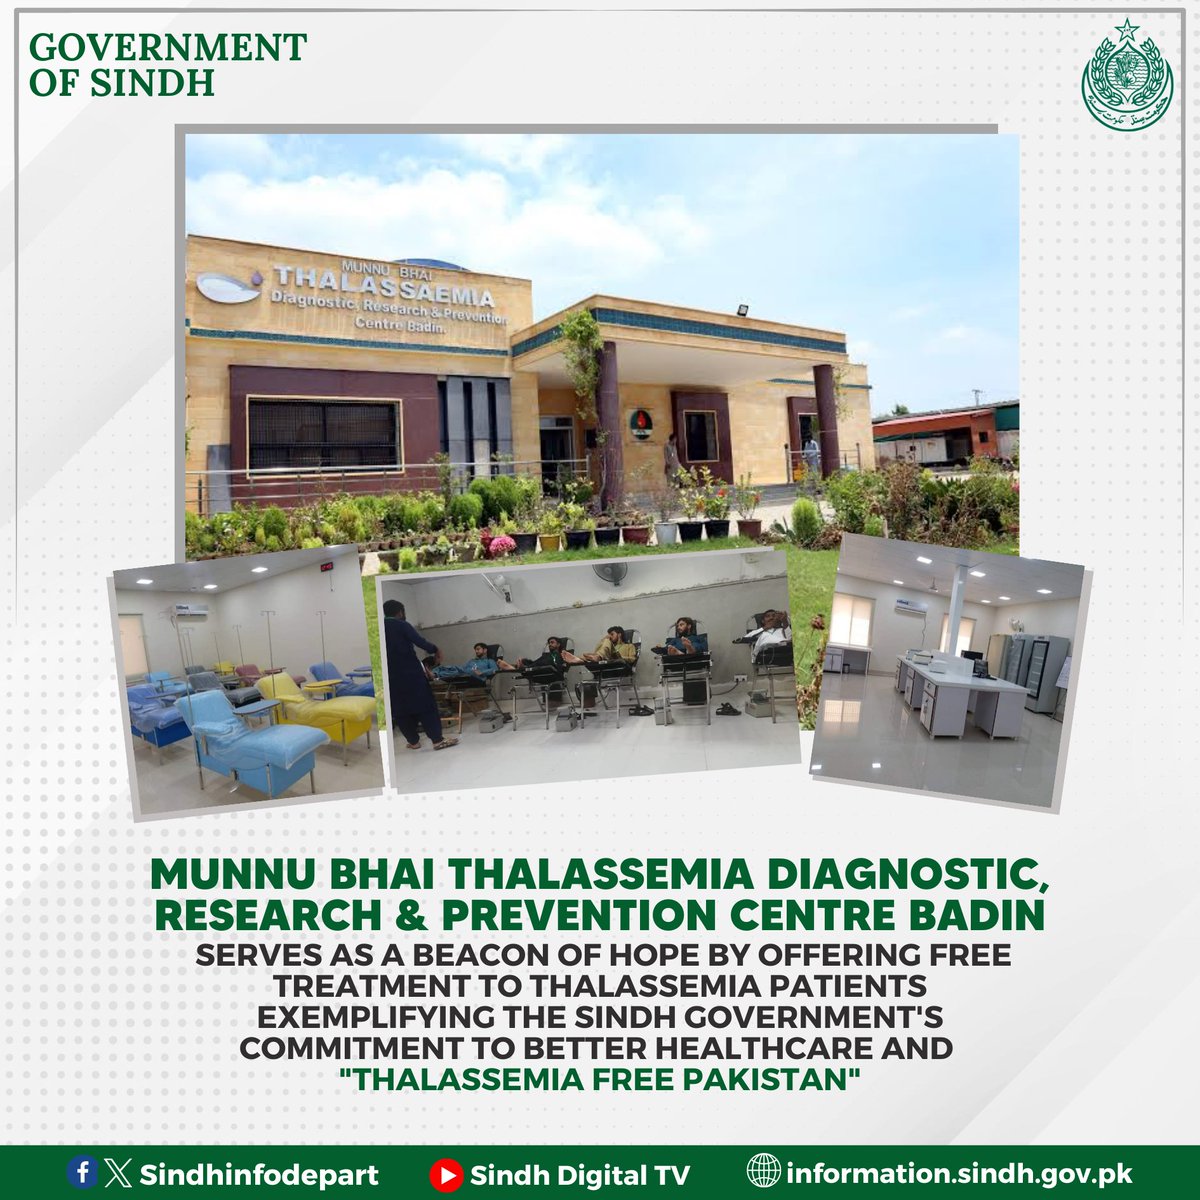 The free-of-cost exemplary services available at Munnu Bhai Thalessemia Diagnostic, Research and Prevention Centre established by Government of Sindh in Badin serves as a beacon of hope for languishing patients and is yet another testament to the resolve to improve healthcare and…